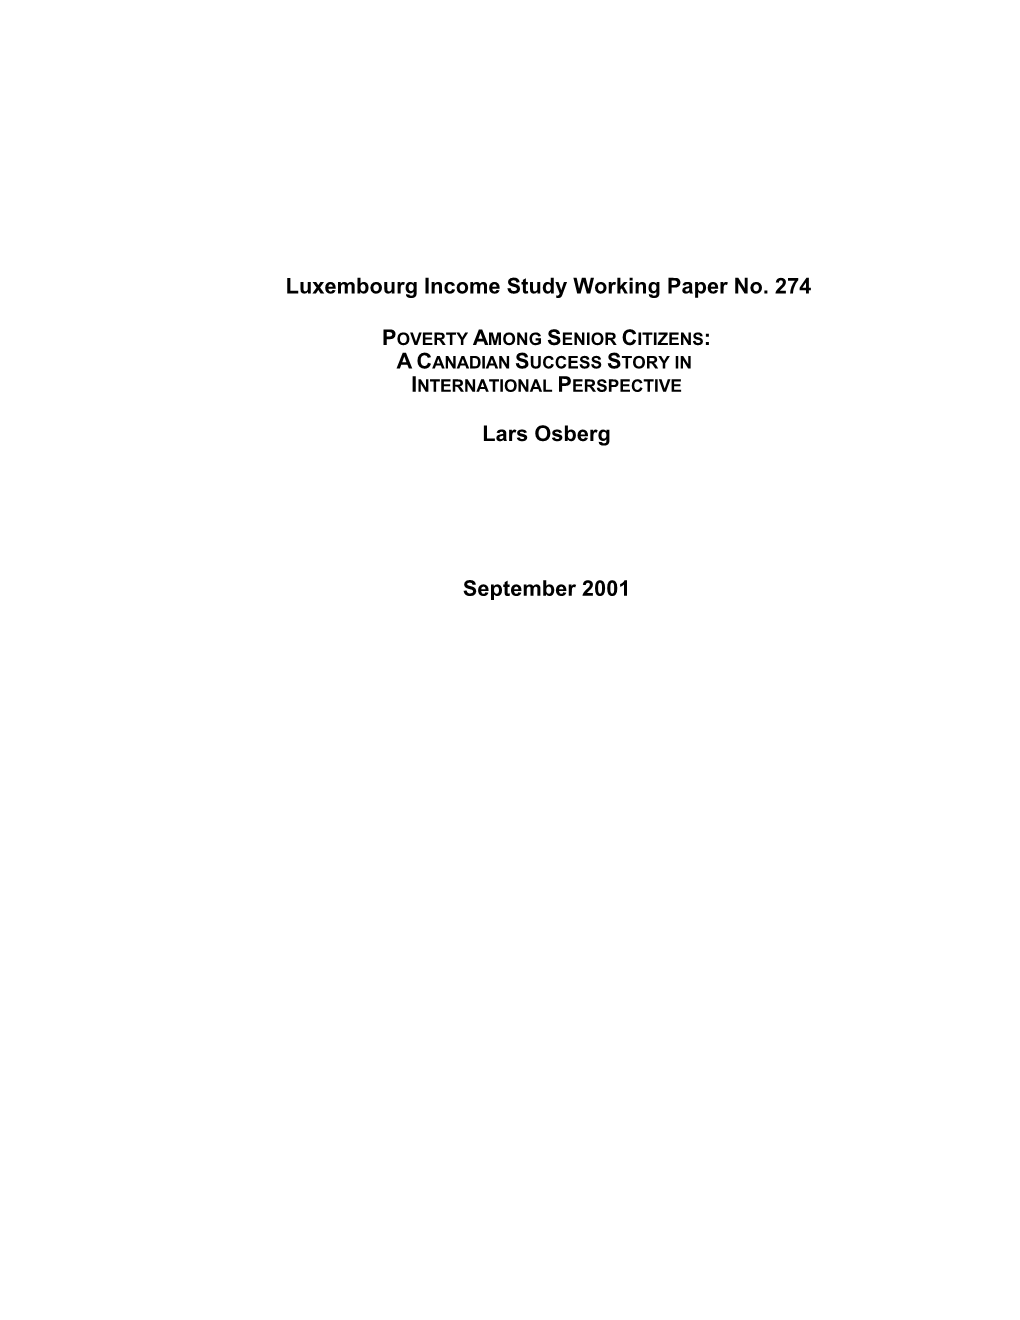 Luxembourg Income Study Working Paper No. 274 Lars Osberg